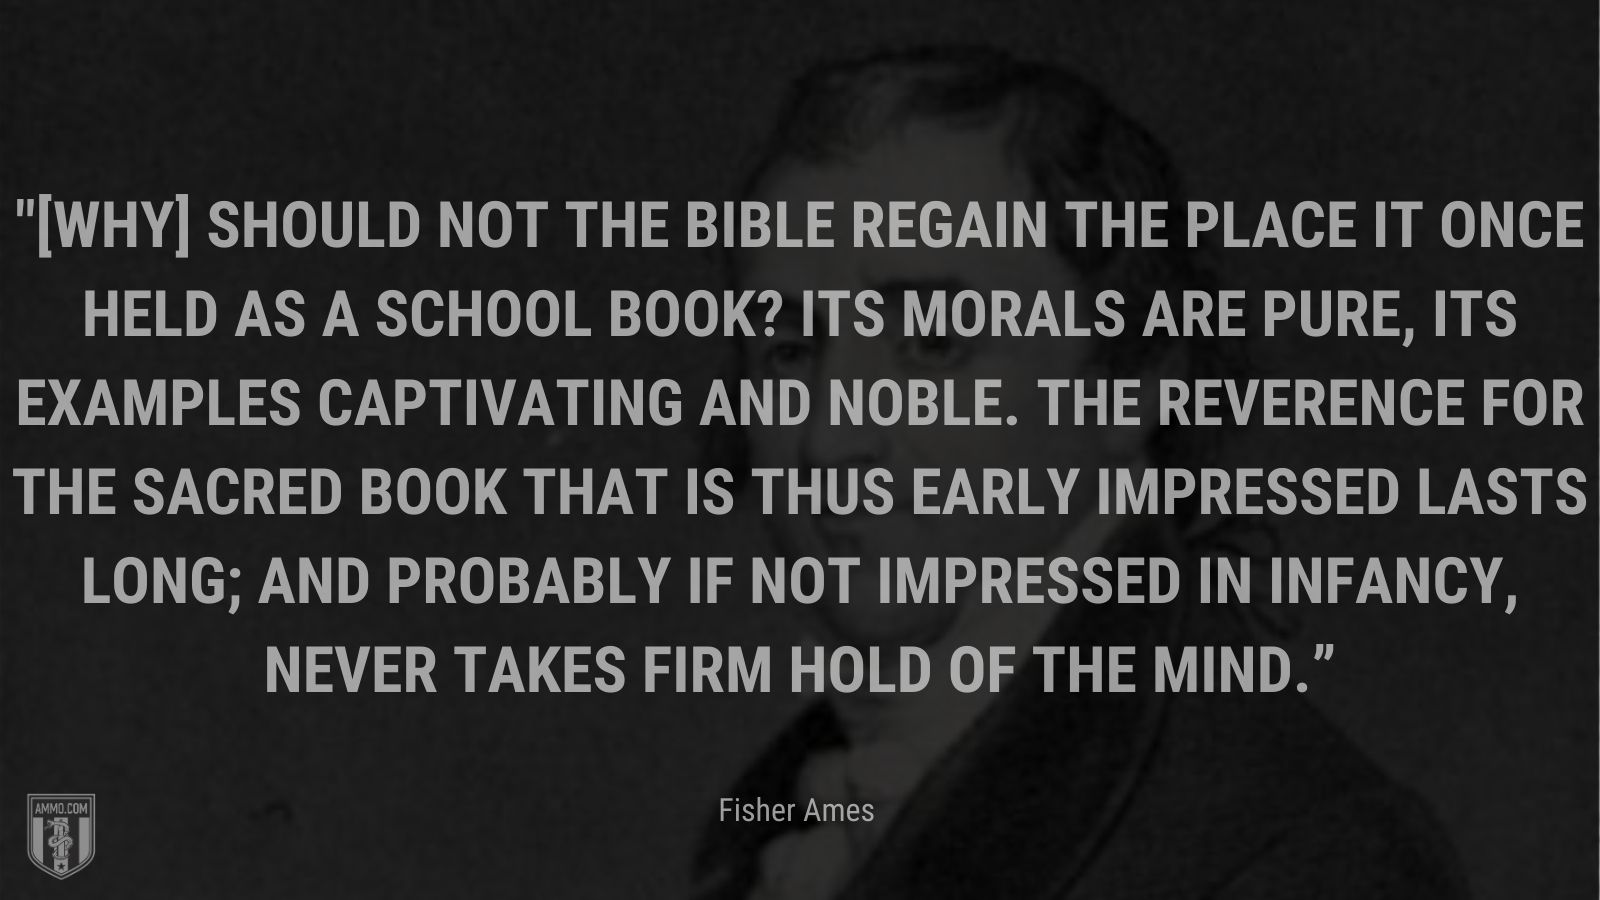 “[Why] should not the Bible regain the place it once held as a school book? Its morals are pure, its examples captivating and noble. The reverence for the Sacred Book that is thus early impressed lasts long; and probably if not impressed in infancy, never takes firm hold of the mind.” - Fisher Ames